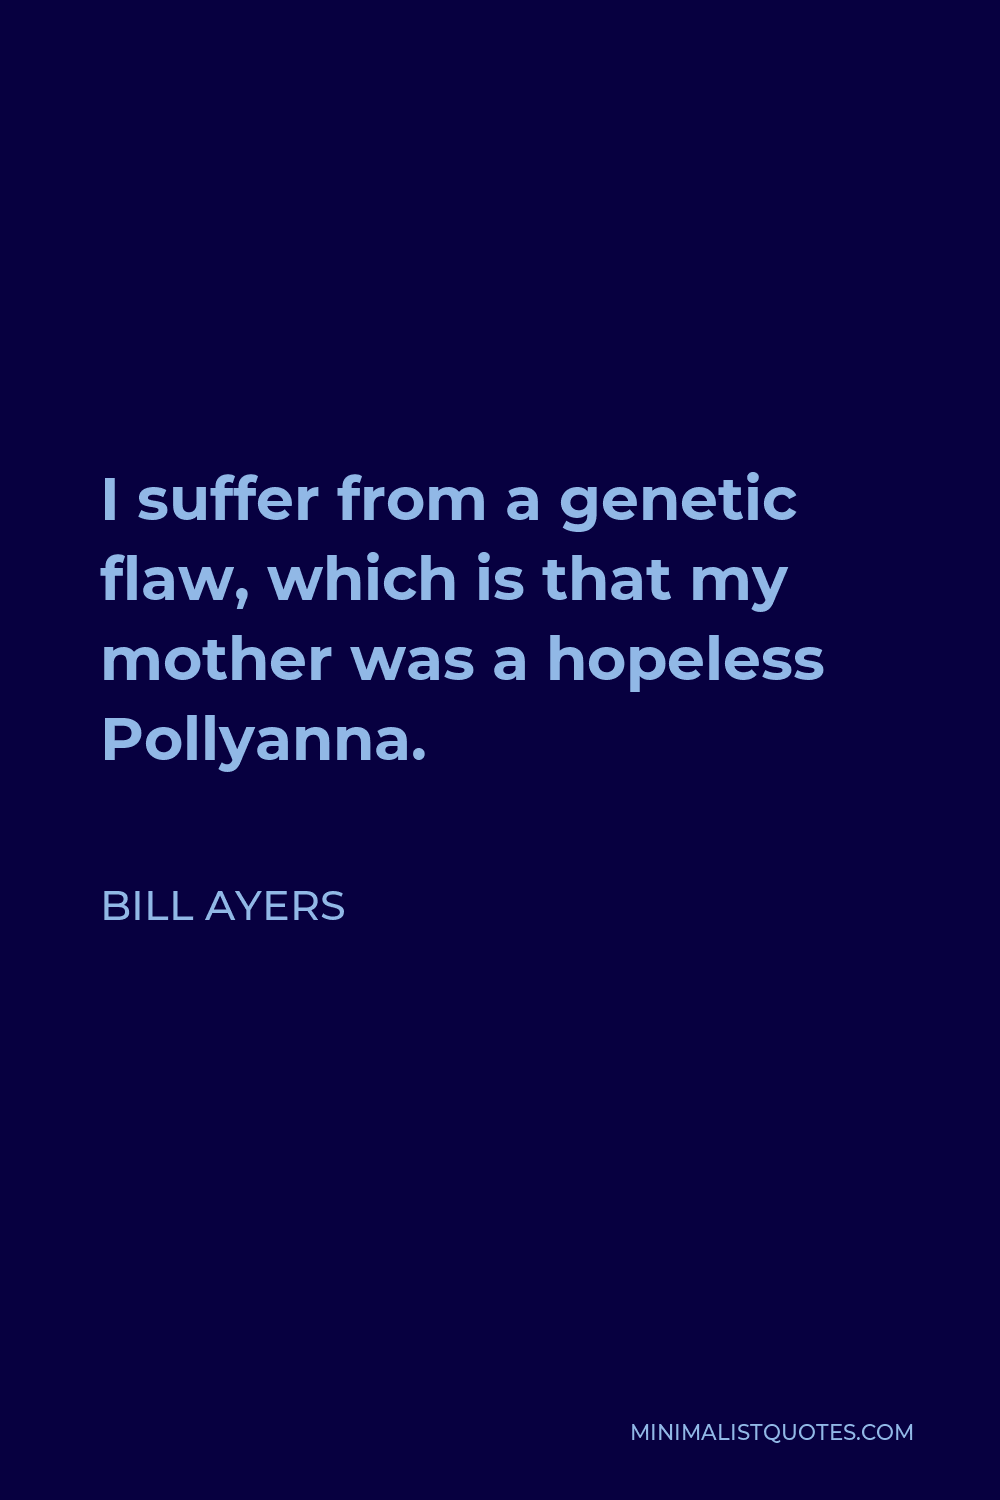 Bill Ayers Quote - I suffer from a genetic flaw, which is that my mother was a hopeless Pollyanna.